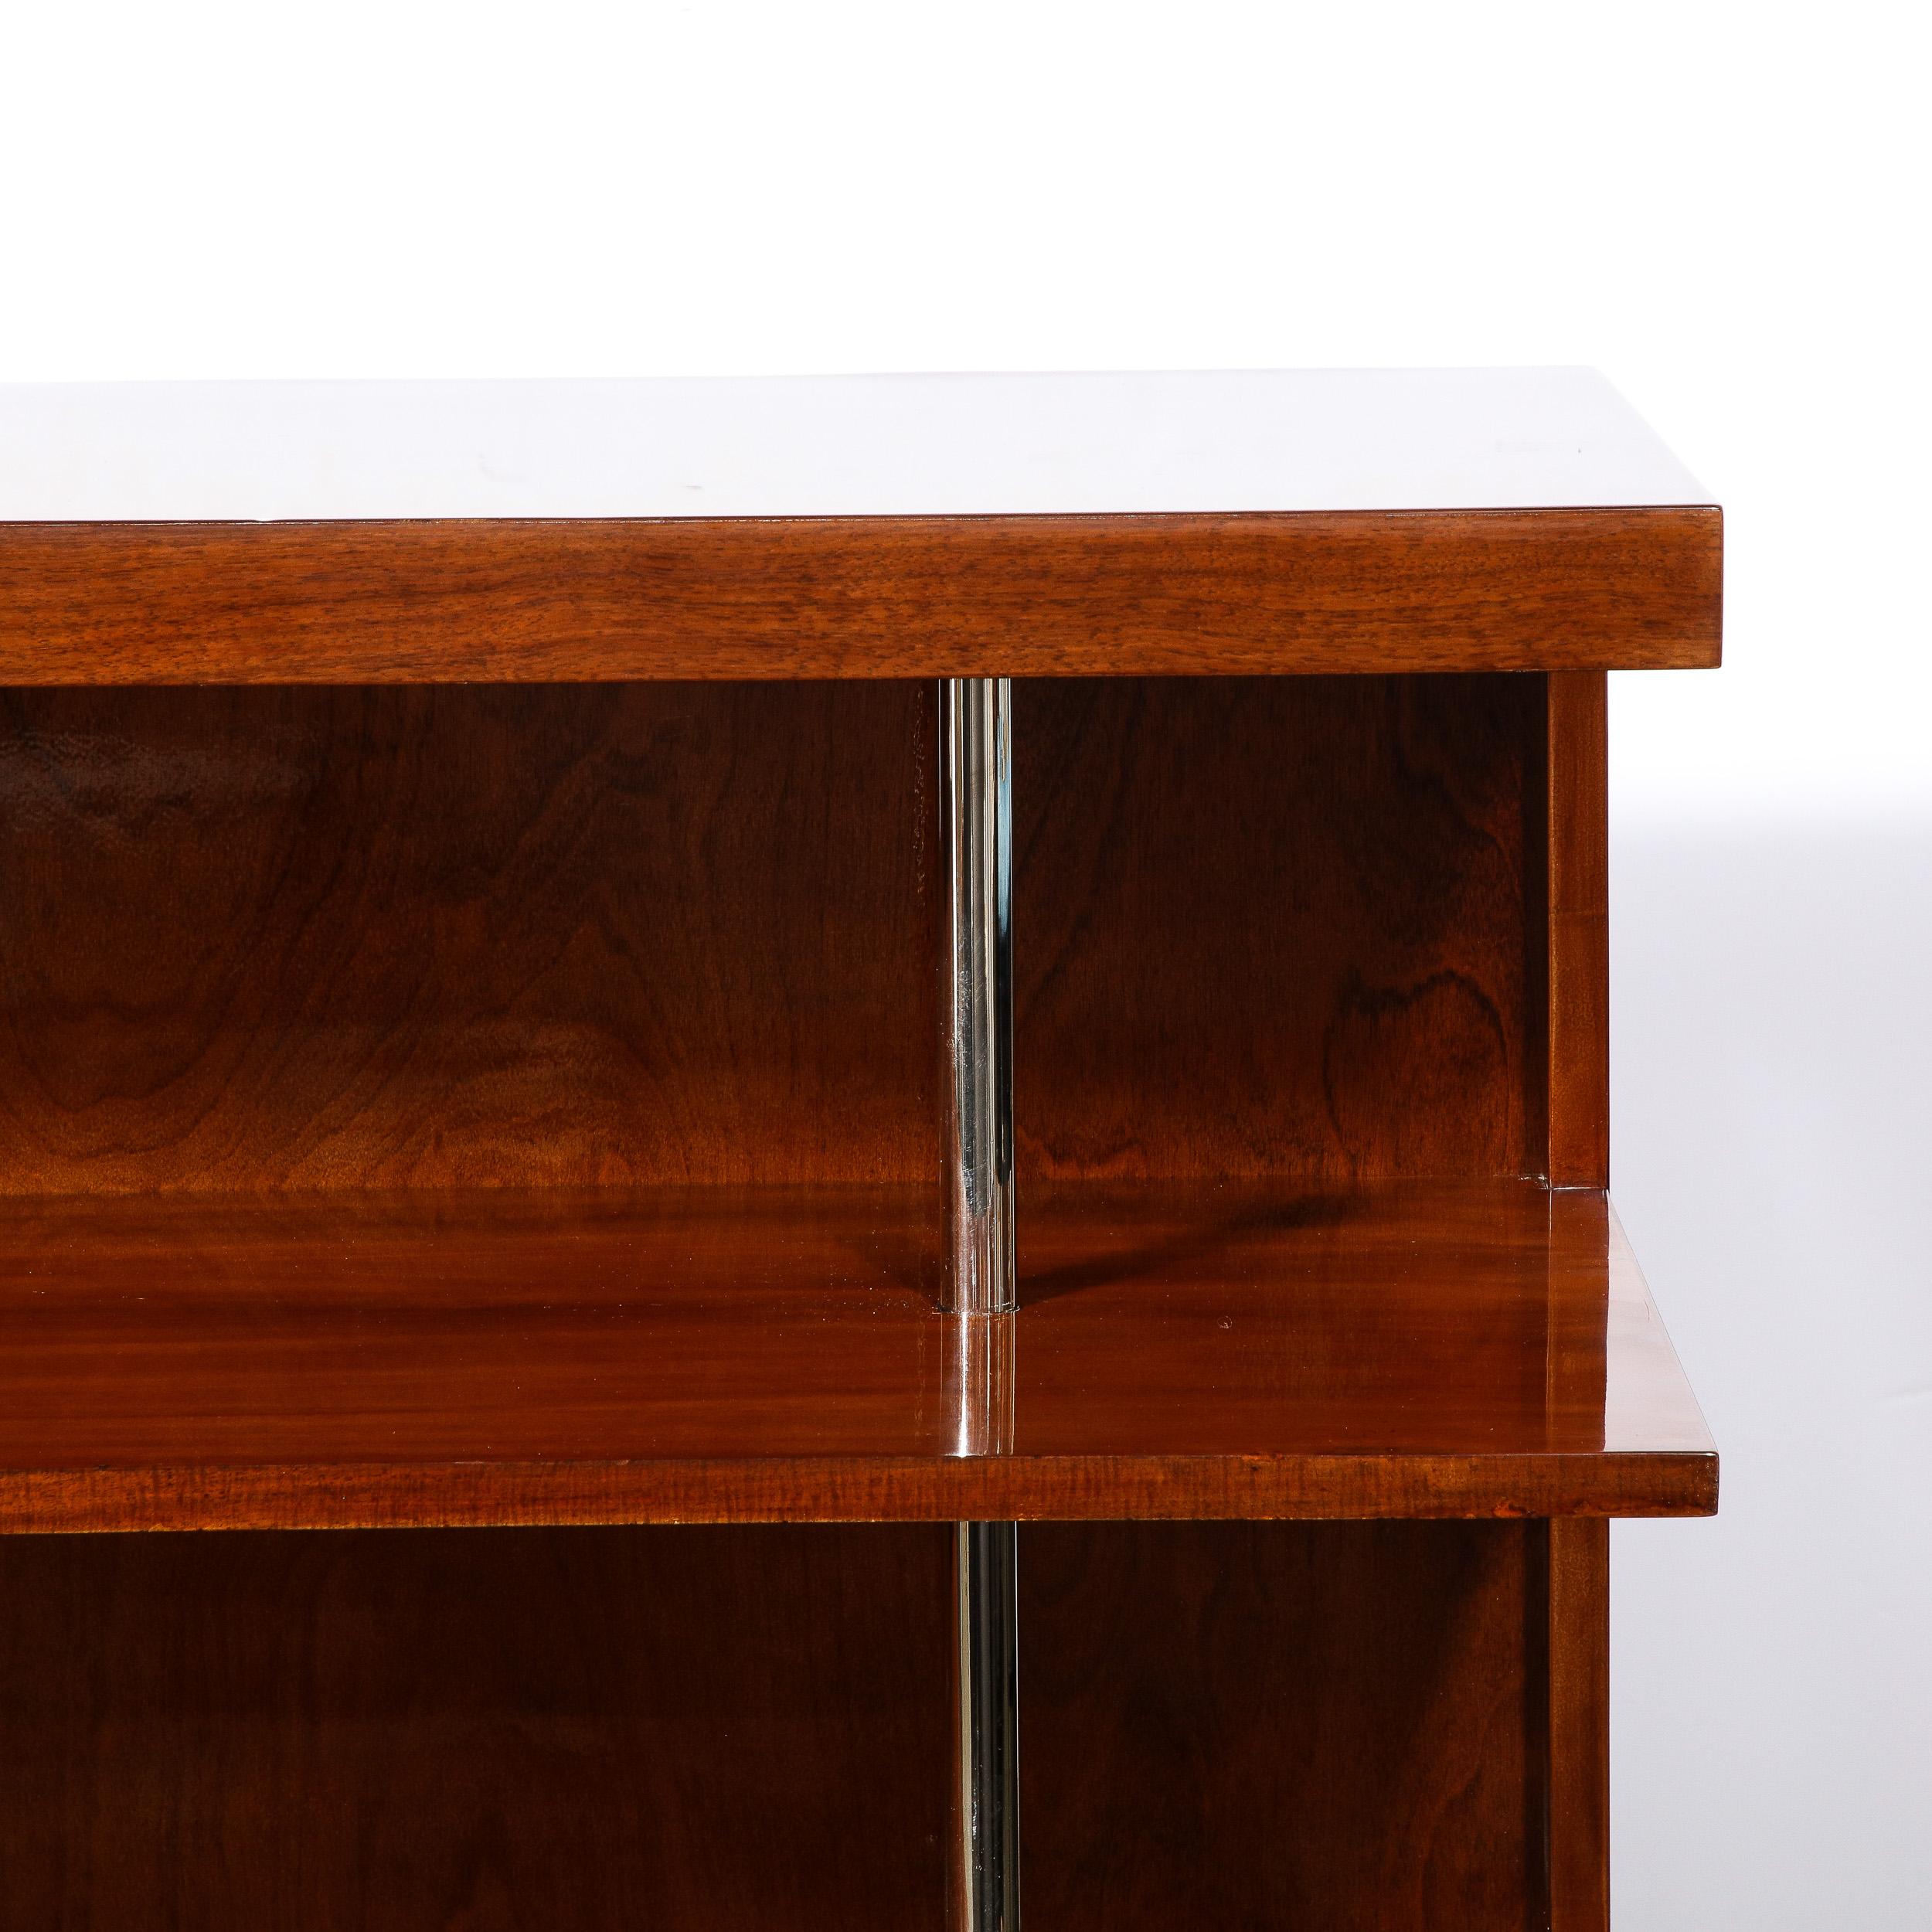 Art Deco East Indian Laurel Bookcase by Gilbert Rohde for Herman Miller No. 344 For Sale 1